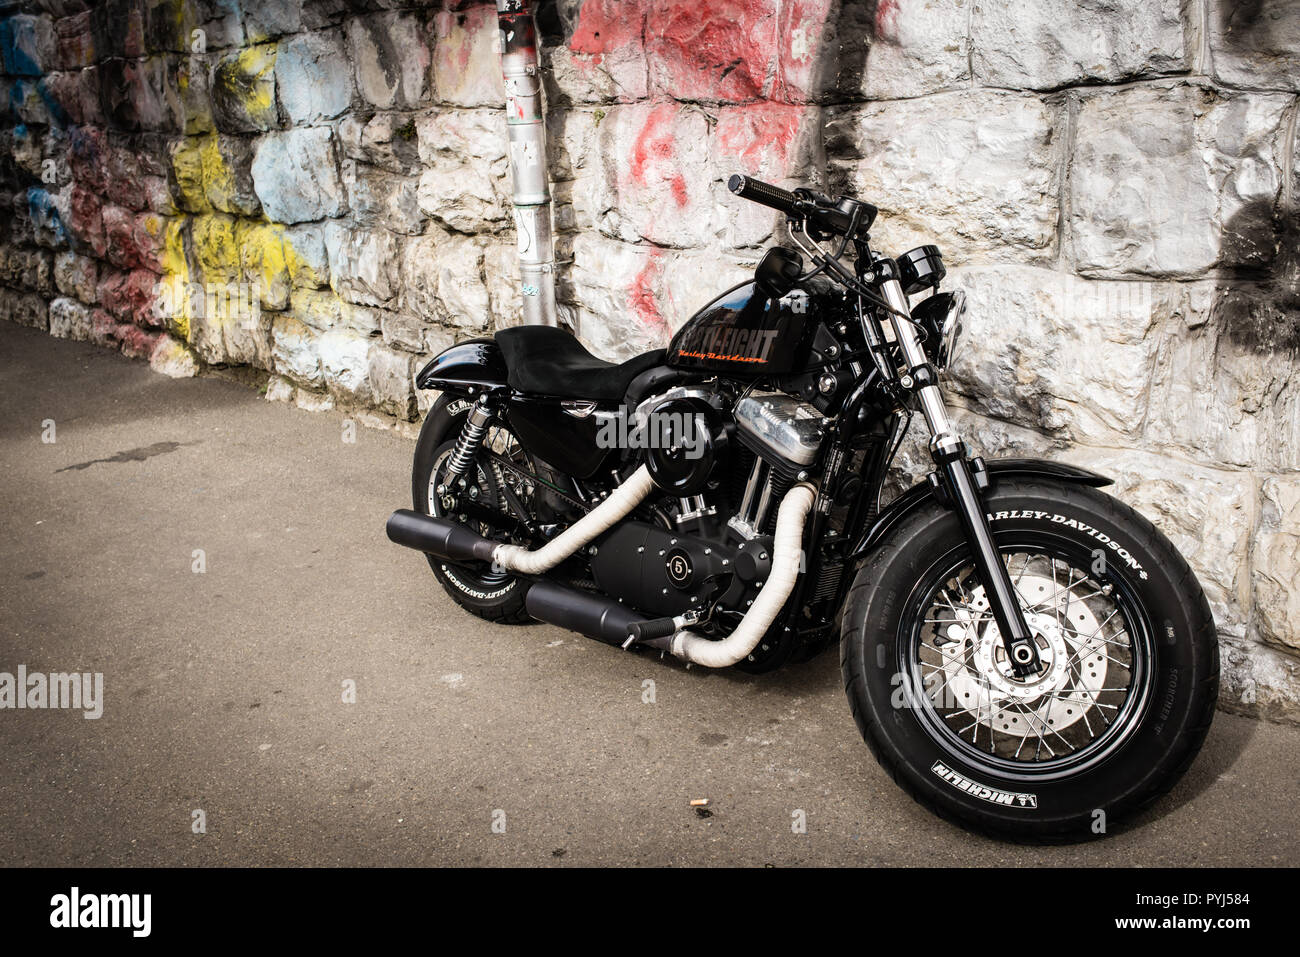 Zurich, Switzerland - March 2017: Black motorcycle 2017 Sportster Forty-Eight, motorbike Harley-Davidson with stone wall and graffiti in background Stock Photo